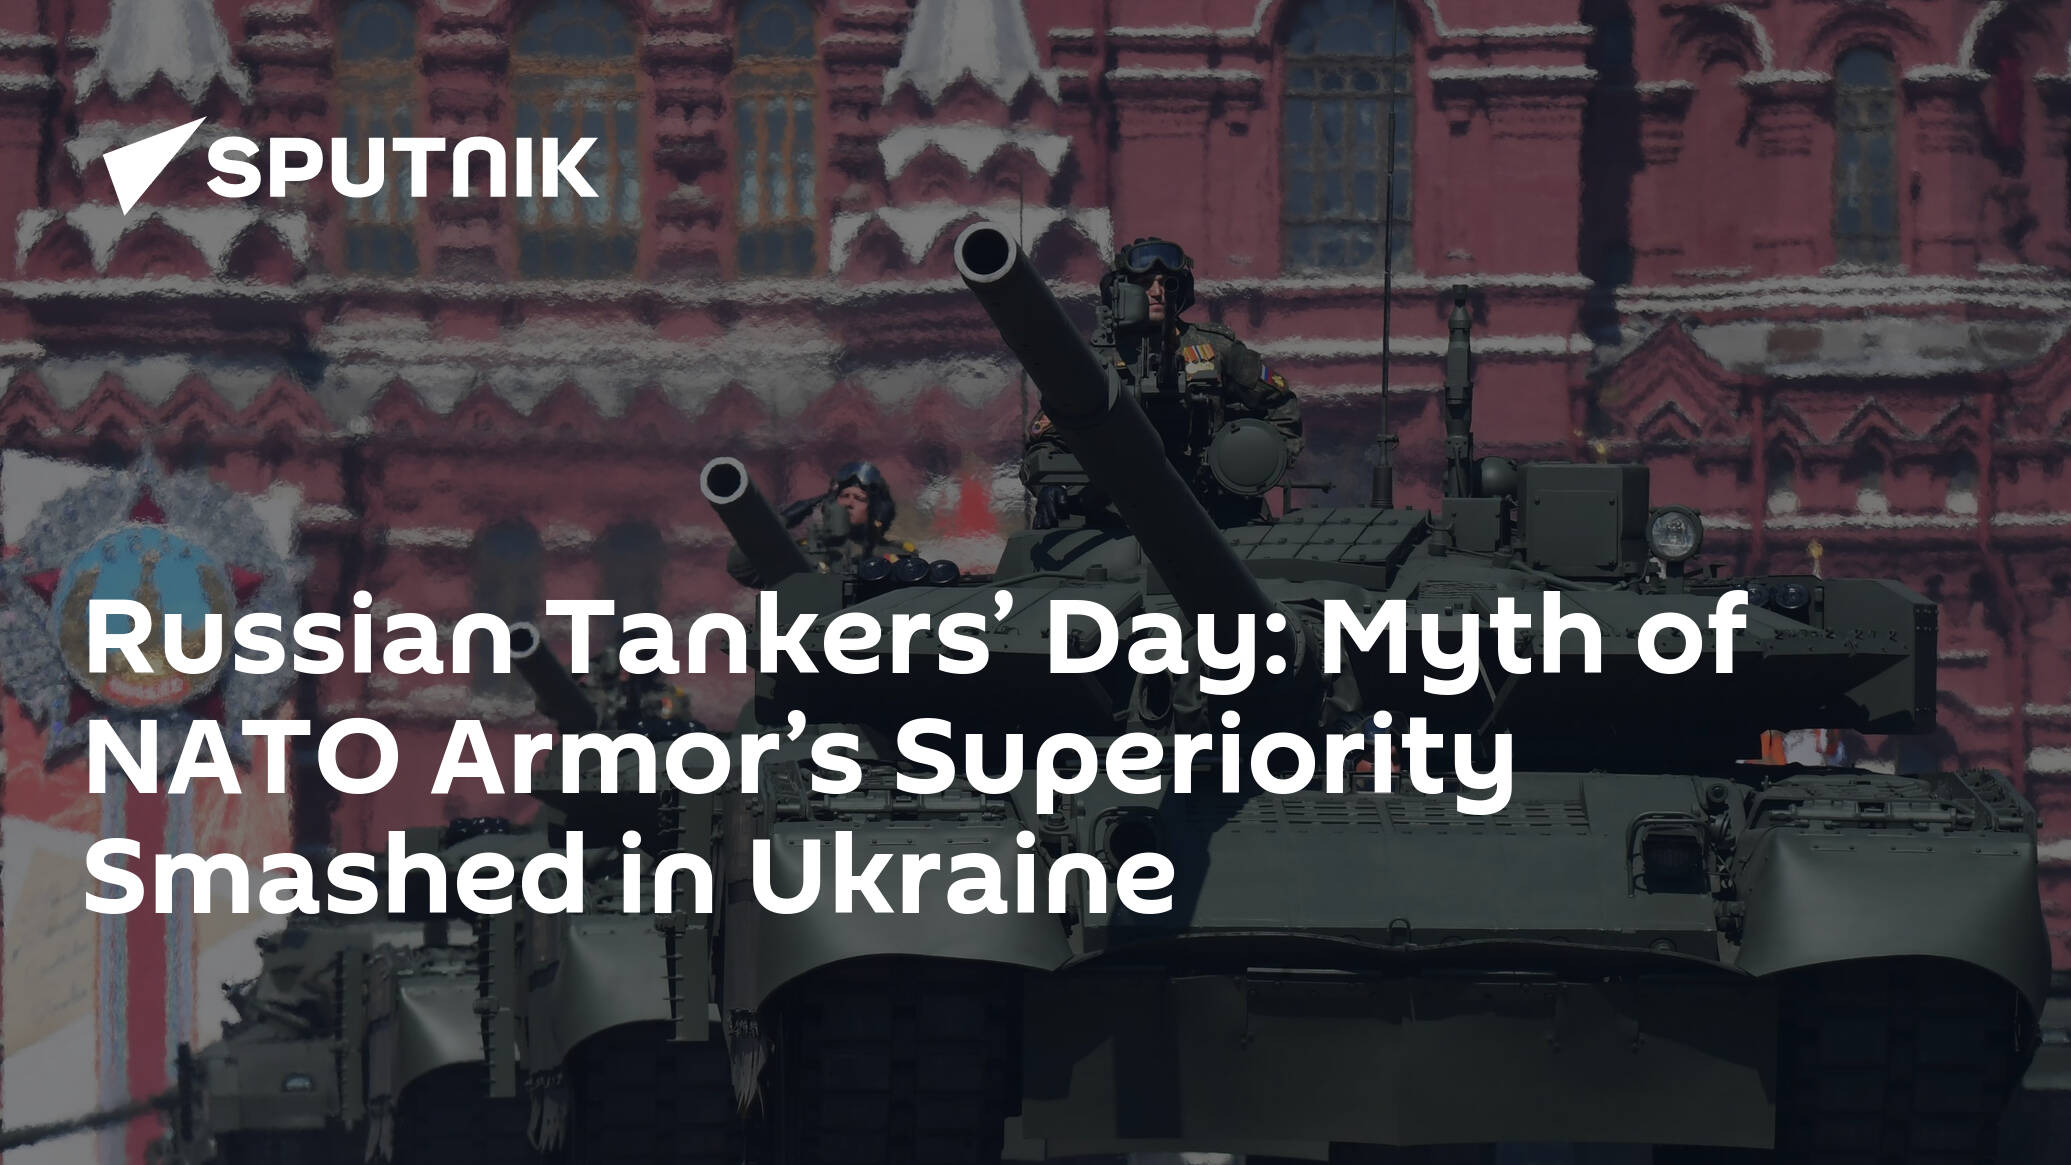 Russian Tankers’ Day: Myth of NATO Armor’s Superiority Smashed in Ukraine